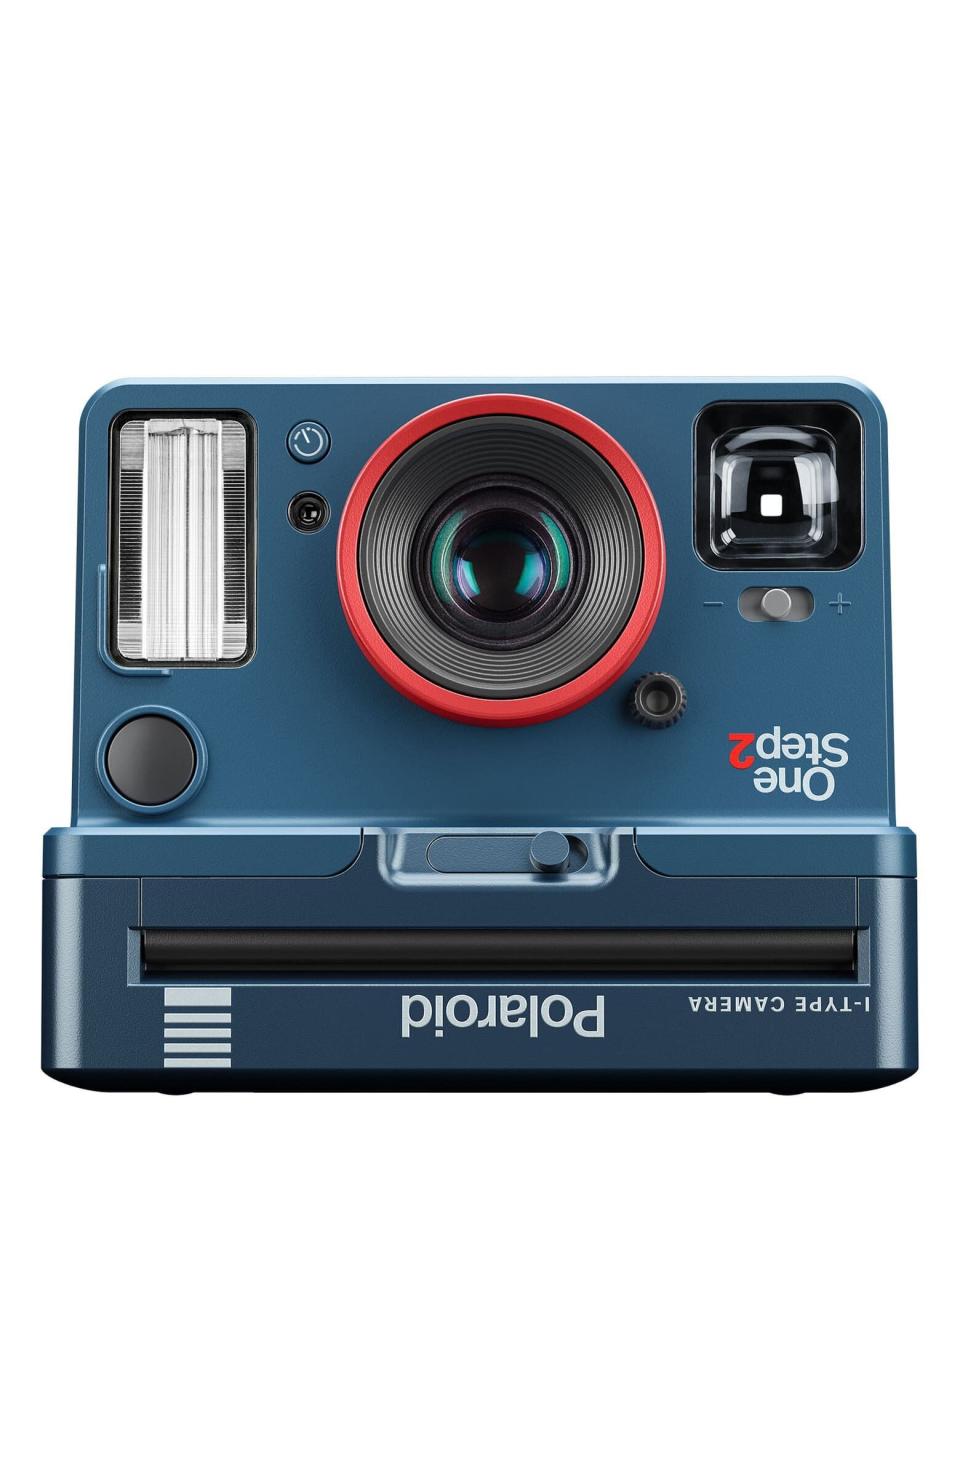 Channel your inner Johnathan Byers with this special-edition Polaroid. <strong><a href="https://fave.co/2xifB59" target="_blank" rel="noopener noreferrer">Buy it at Nordstrom.</a></strong>